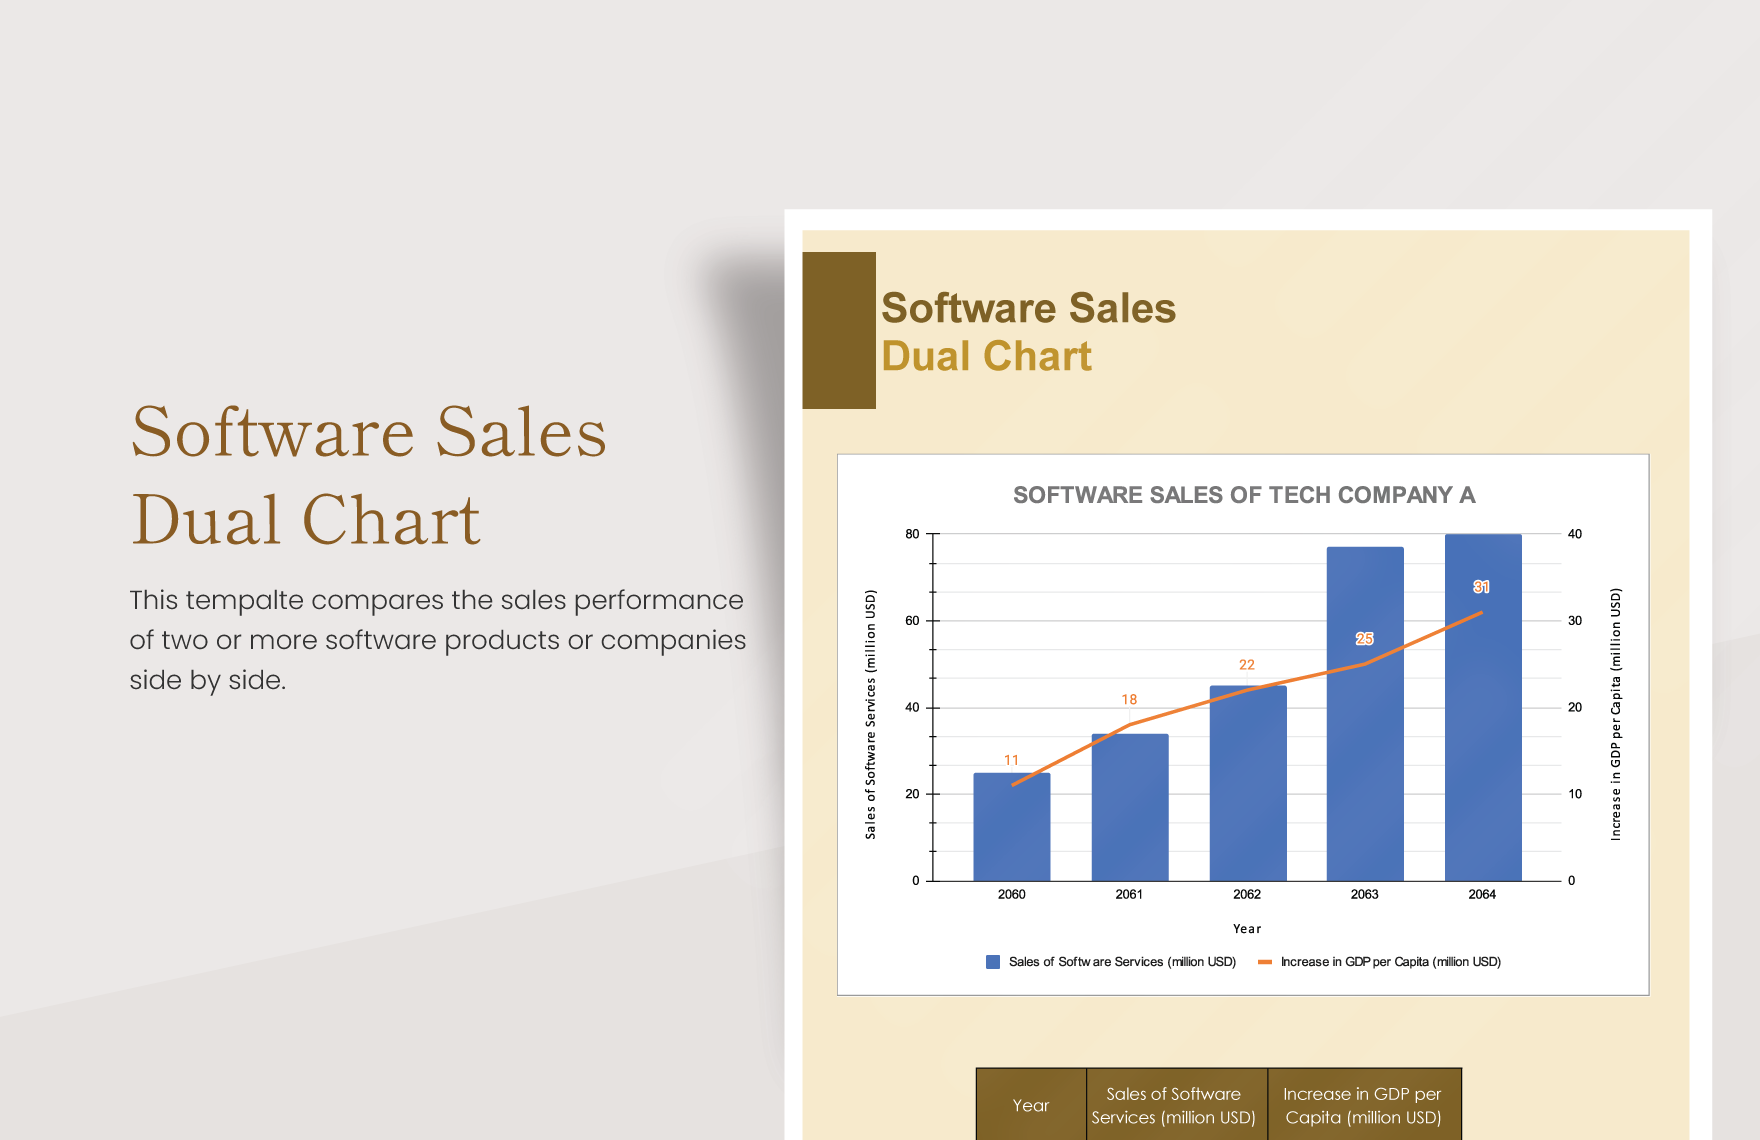 Software Sales Dual Chart